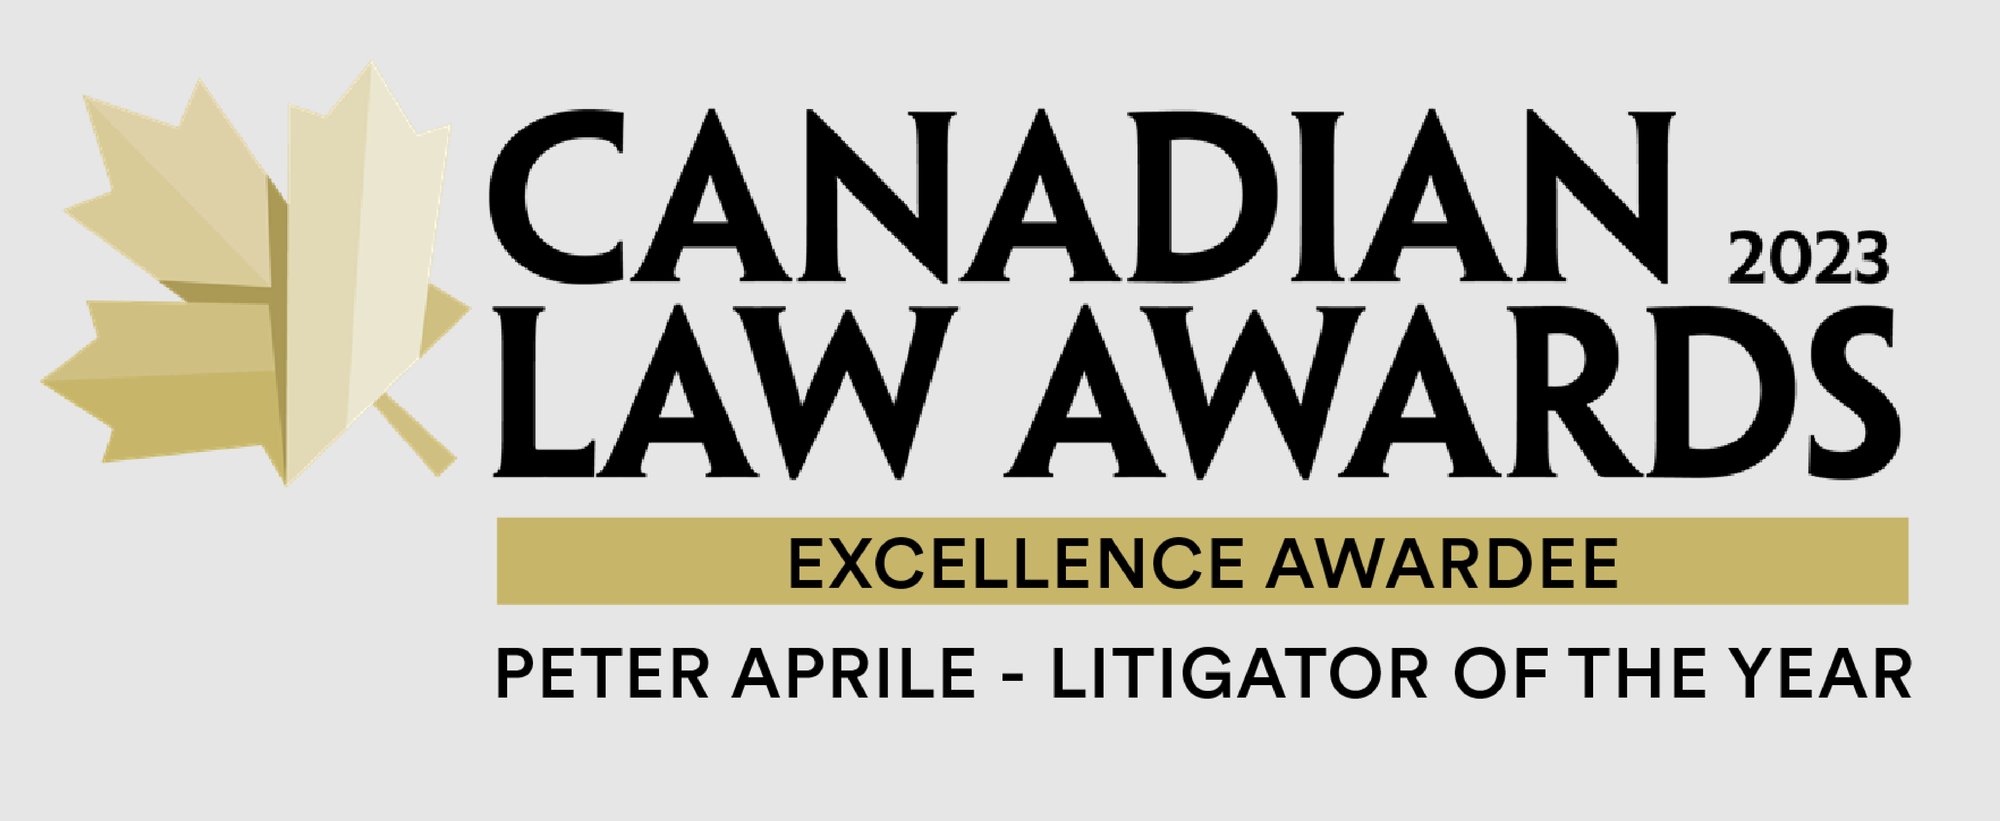 Canadian Law Awards 2023 PVA Litigator of the Year